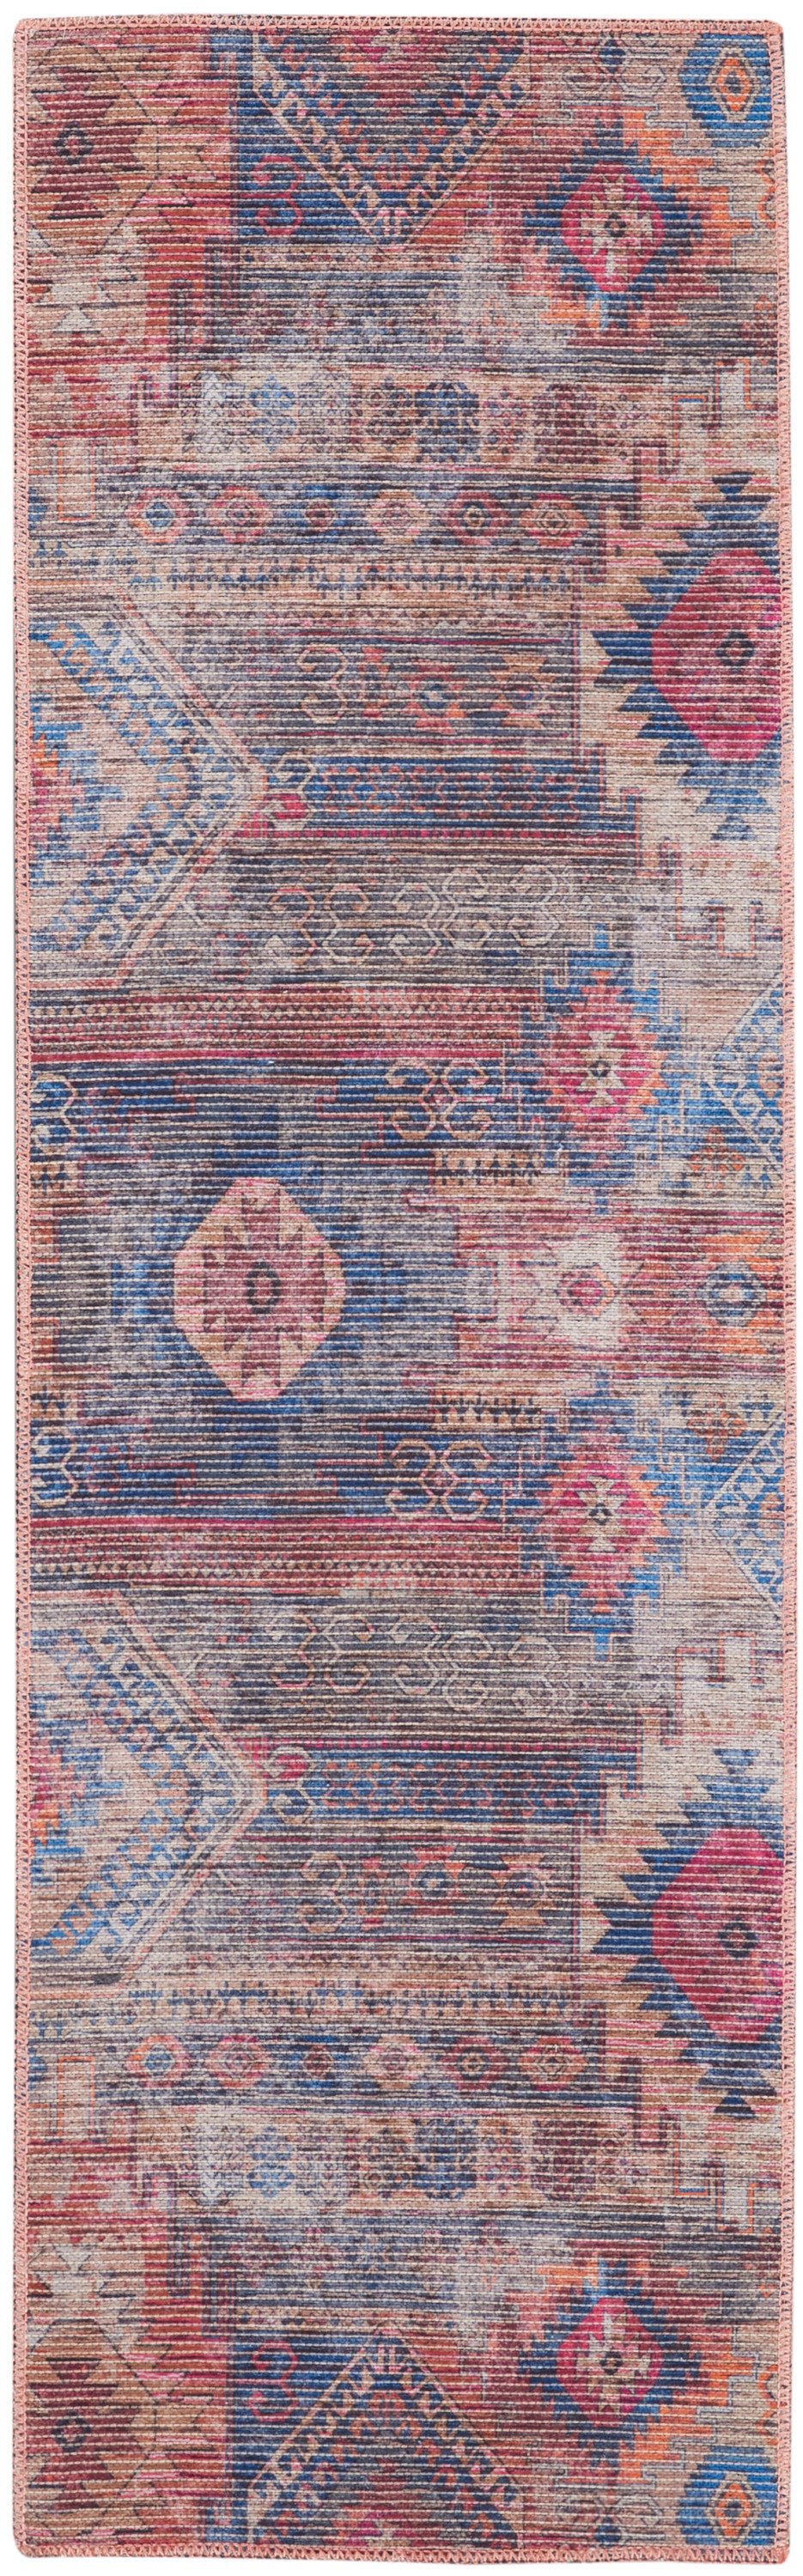 Nicole Curtis Machine Washable Series 1 SR106 Multicolor  Traditional Machinemade Rug